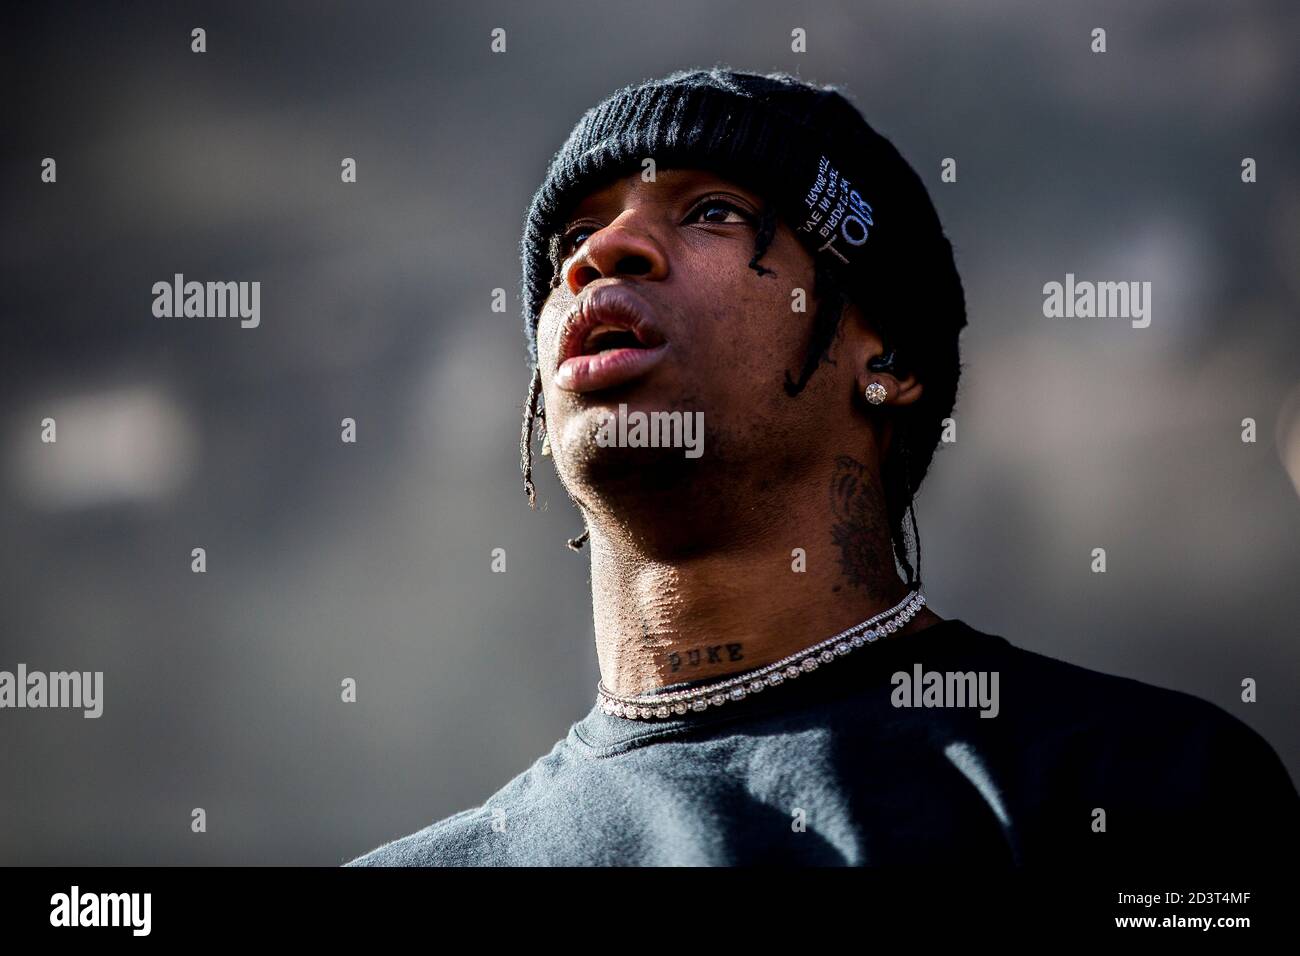 Odense, Denmark. 24th, June 2017. The American rapper and lyricist Travis  Scott performs a live concert during the Danish music festival Tinderbox  2017 in Odense. (Photo credit: Gonzales Photo - Lasse Lagoni